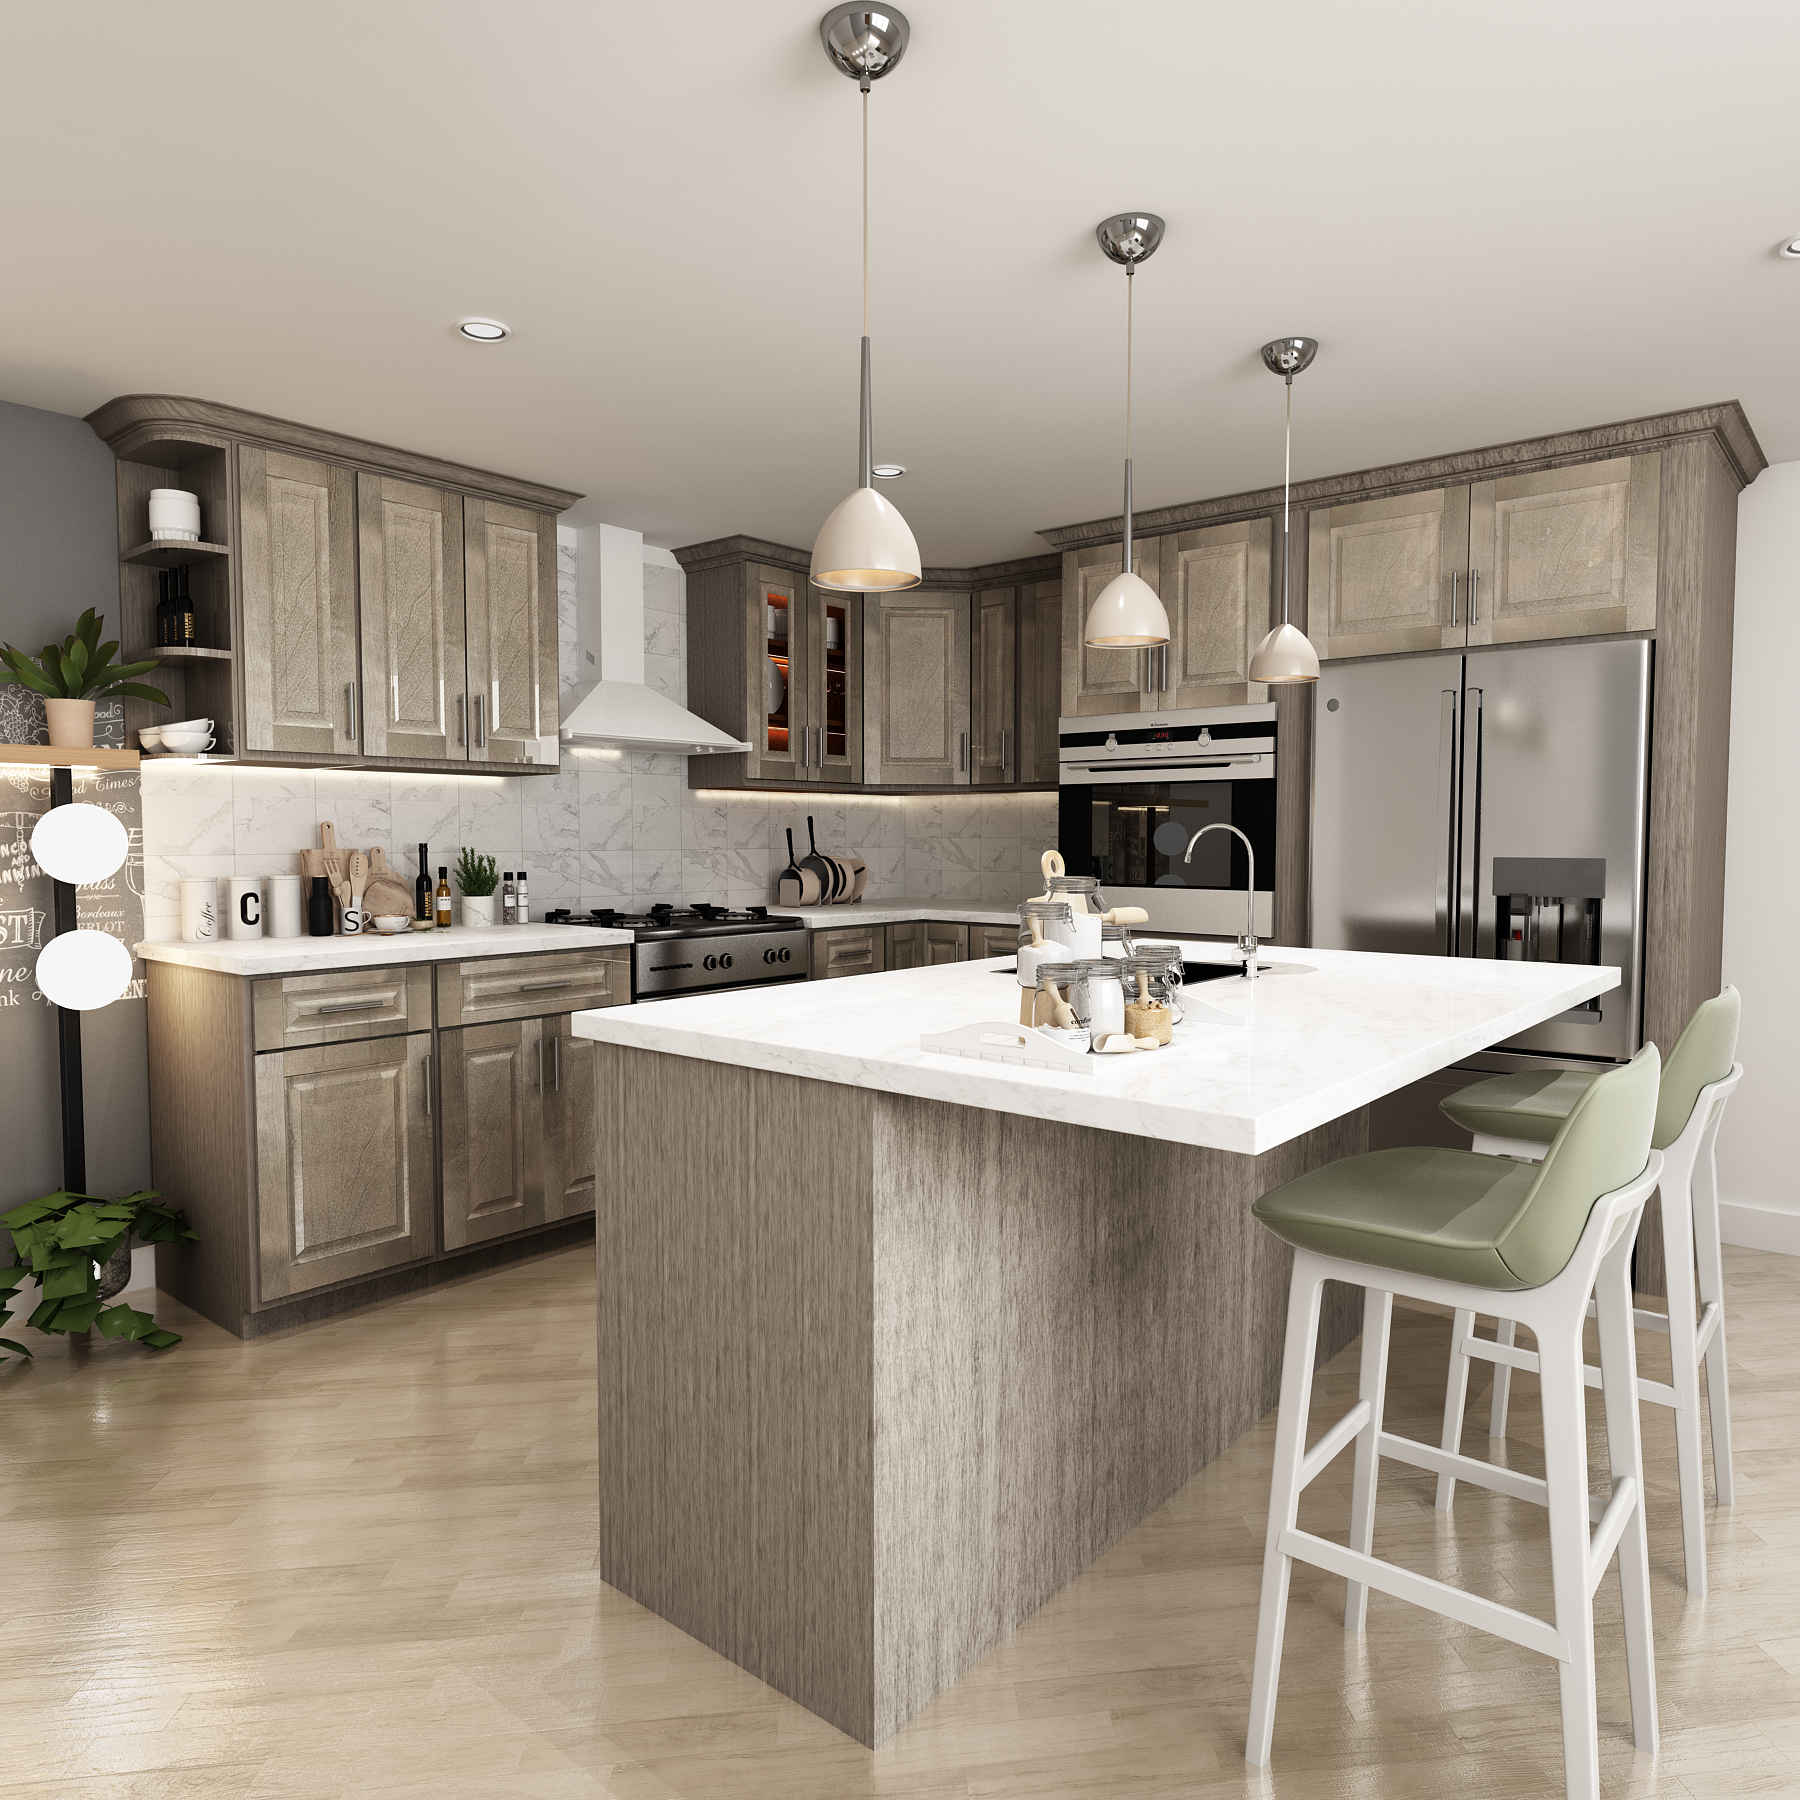 10x10 Kitchen Layout Design - Aspen Charcoal Grey Cabinets